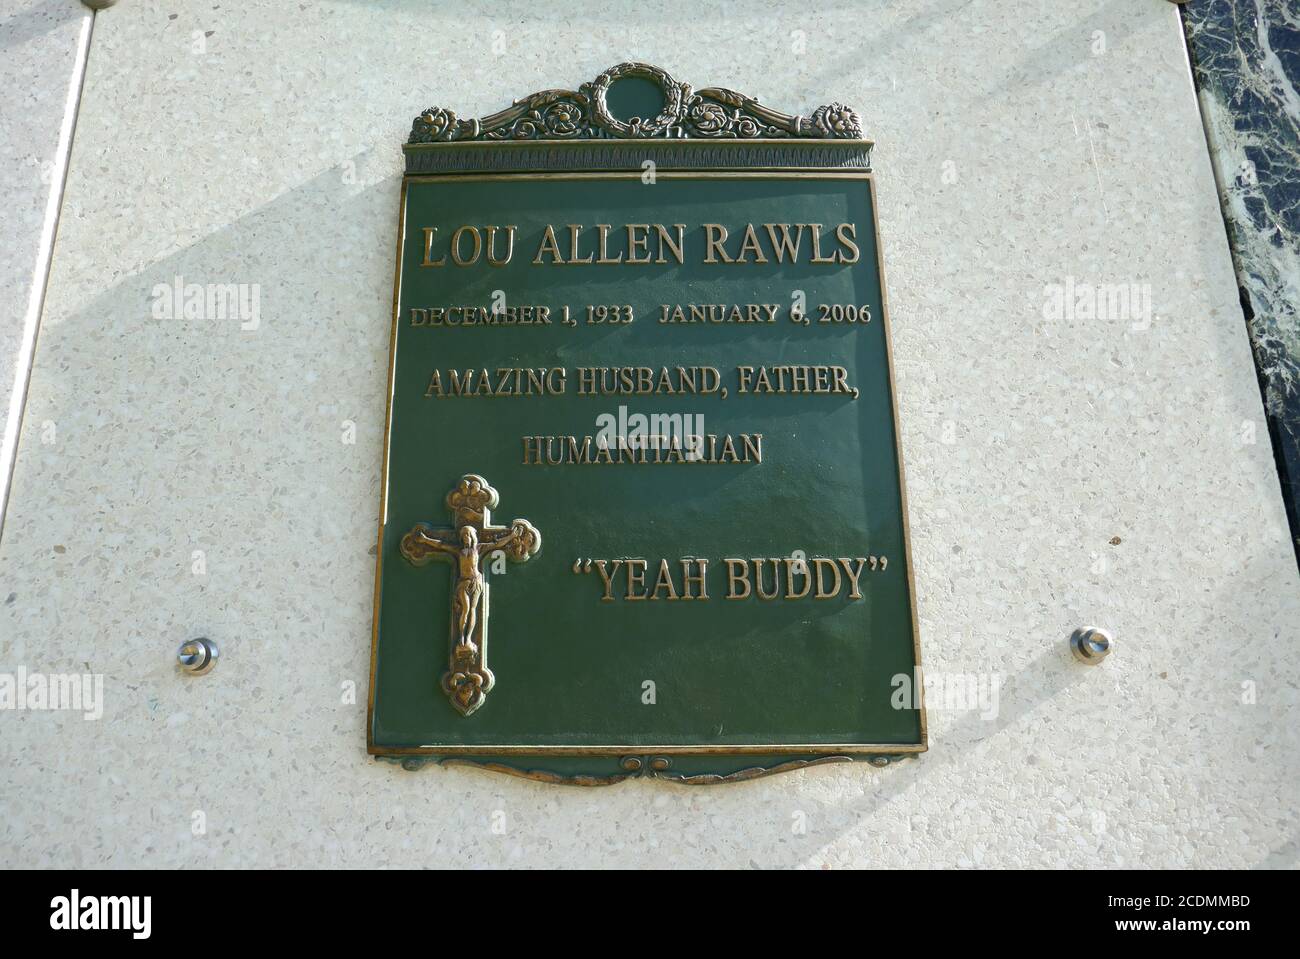 Los Angeles, California, USA 28th August 2020 A general view of atmosphere of Singer Lou Rawls Grave at Forest Lawn Memorial Park Hollywood Hills on August 28, 2020 in Los Angeles, California, USA. Photo by Barry King/Alamy Stock Photo Stock Photo